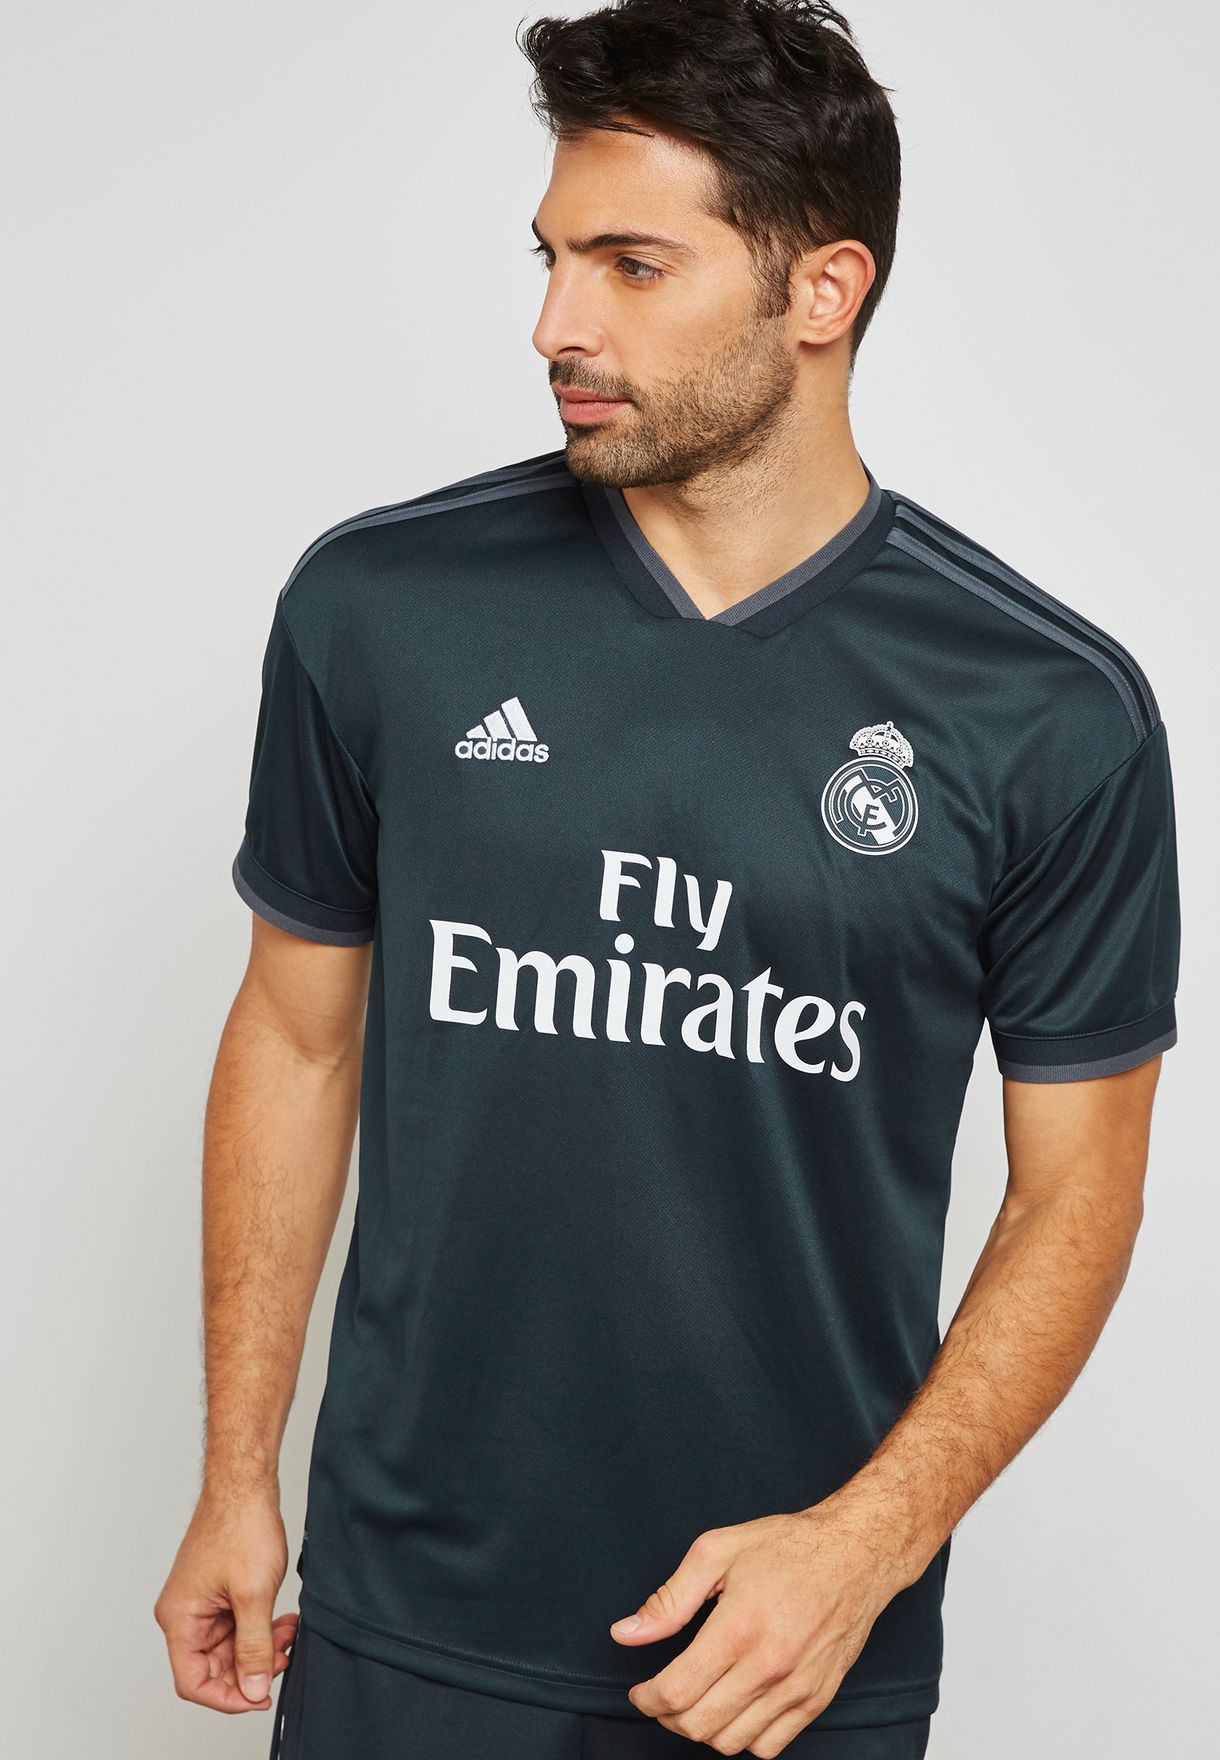 Real Madrid 18/19 Away Jersey